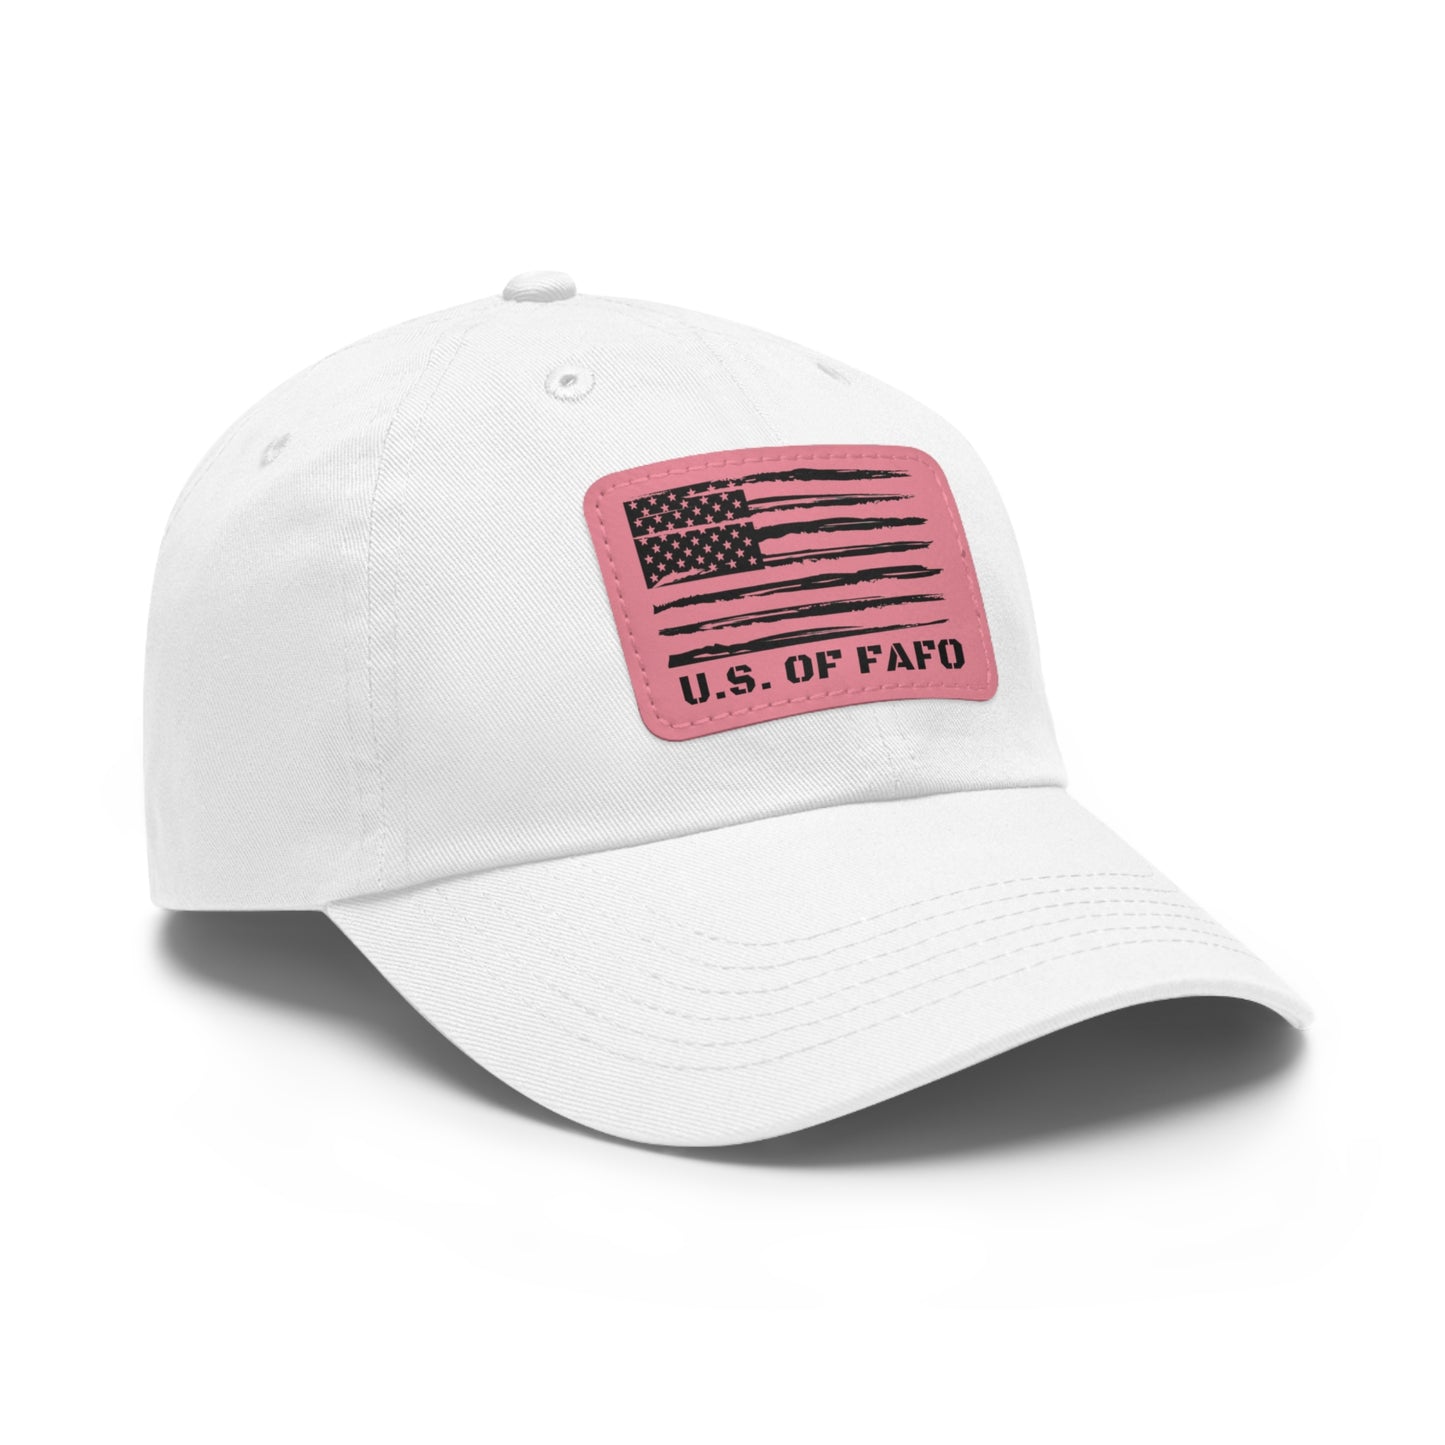 “THE UNITED STATES OF FAFO” Leather Patch Hat